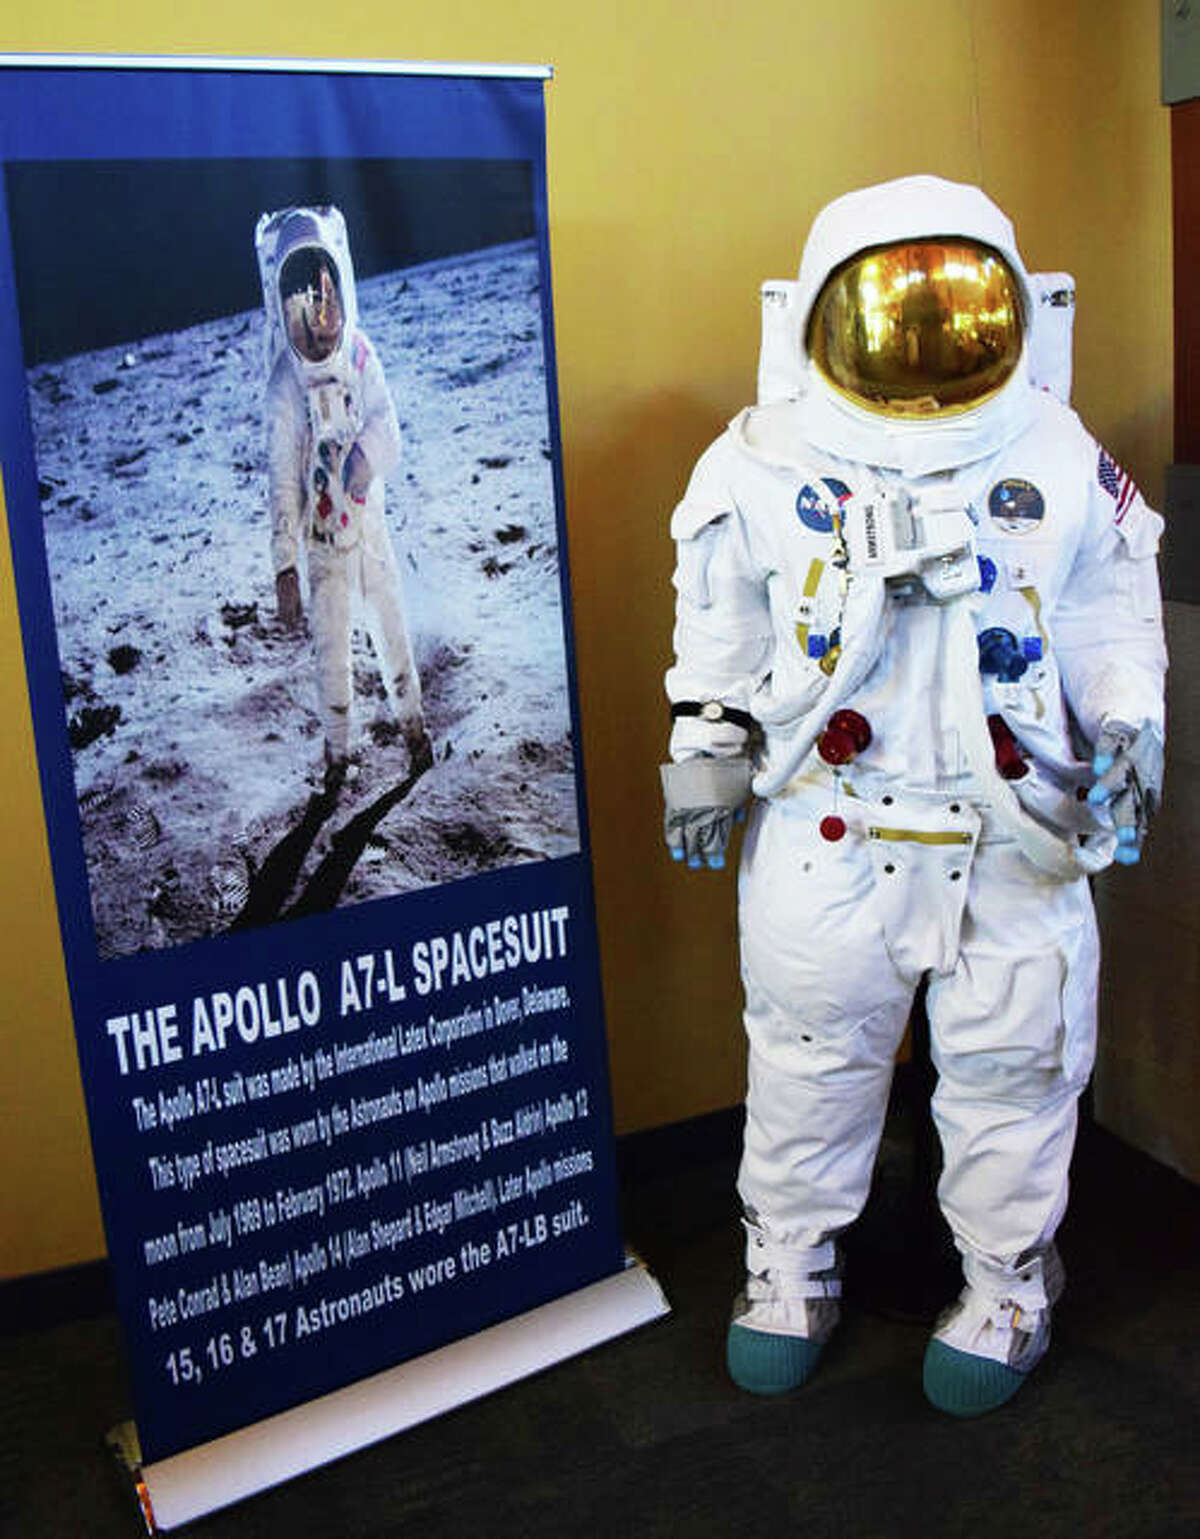 A replica of the original spacesuit worn by Neil Armstrong on the Apollo 11 Moon landing on display at the Glen Carbon Centennial Library.